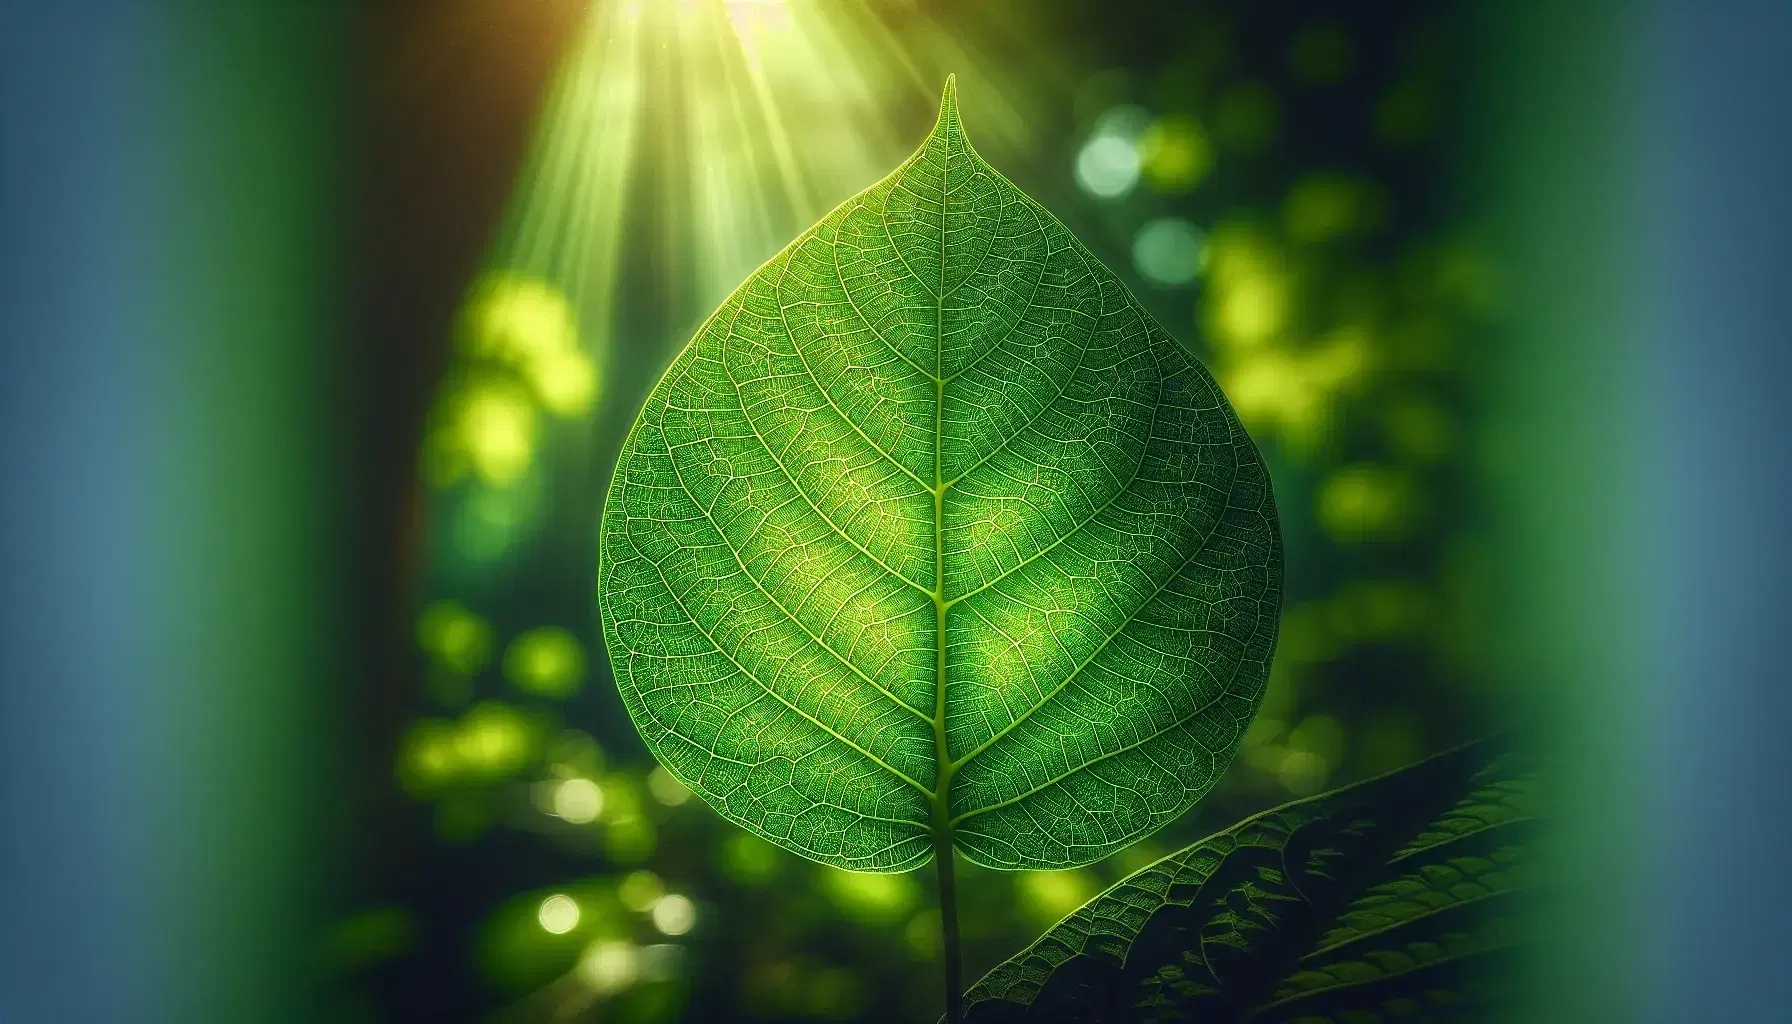 Lush green leaf with veins highlighted by sunlight, blurred background of green and yellow suggesting lush nature.